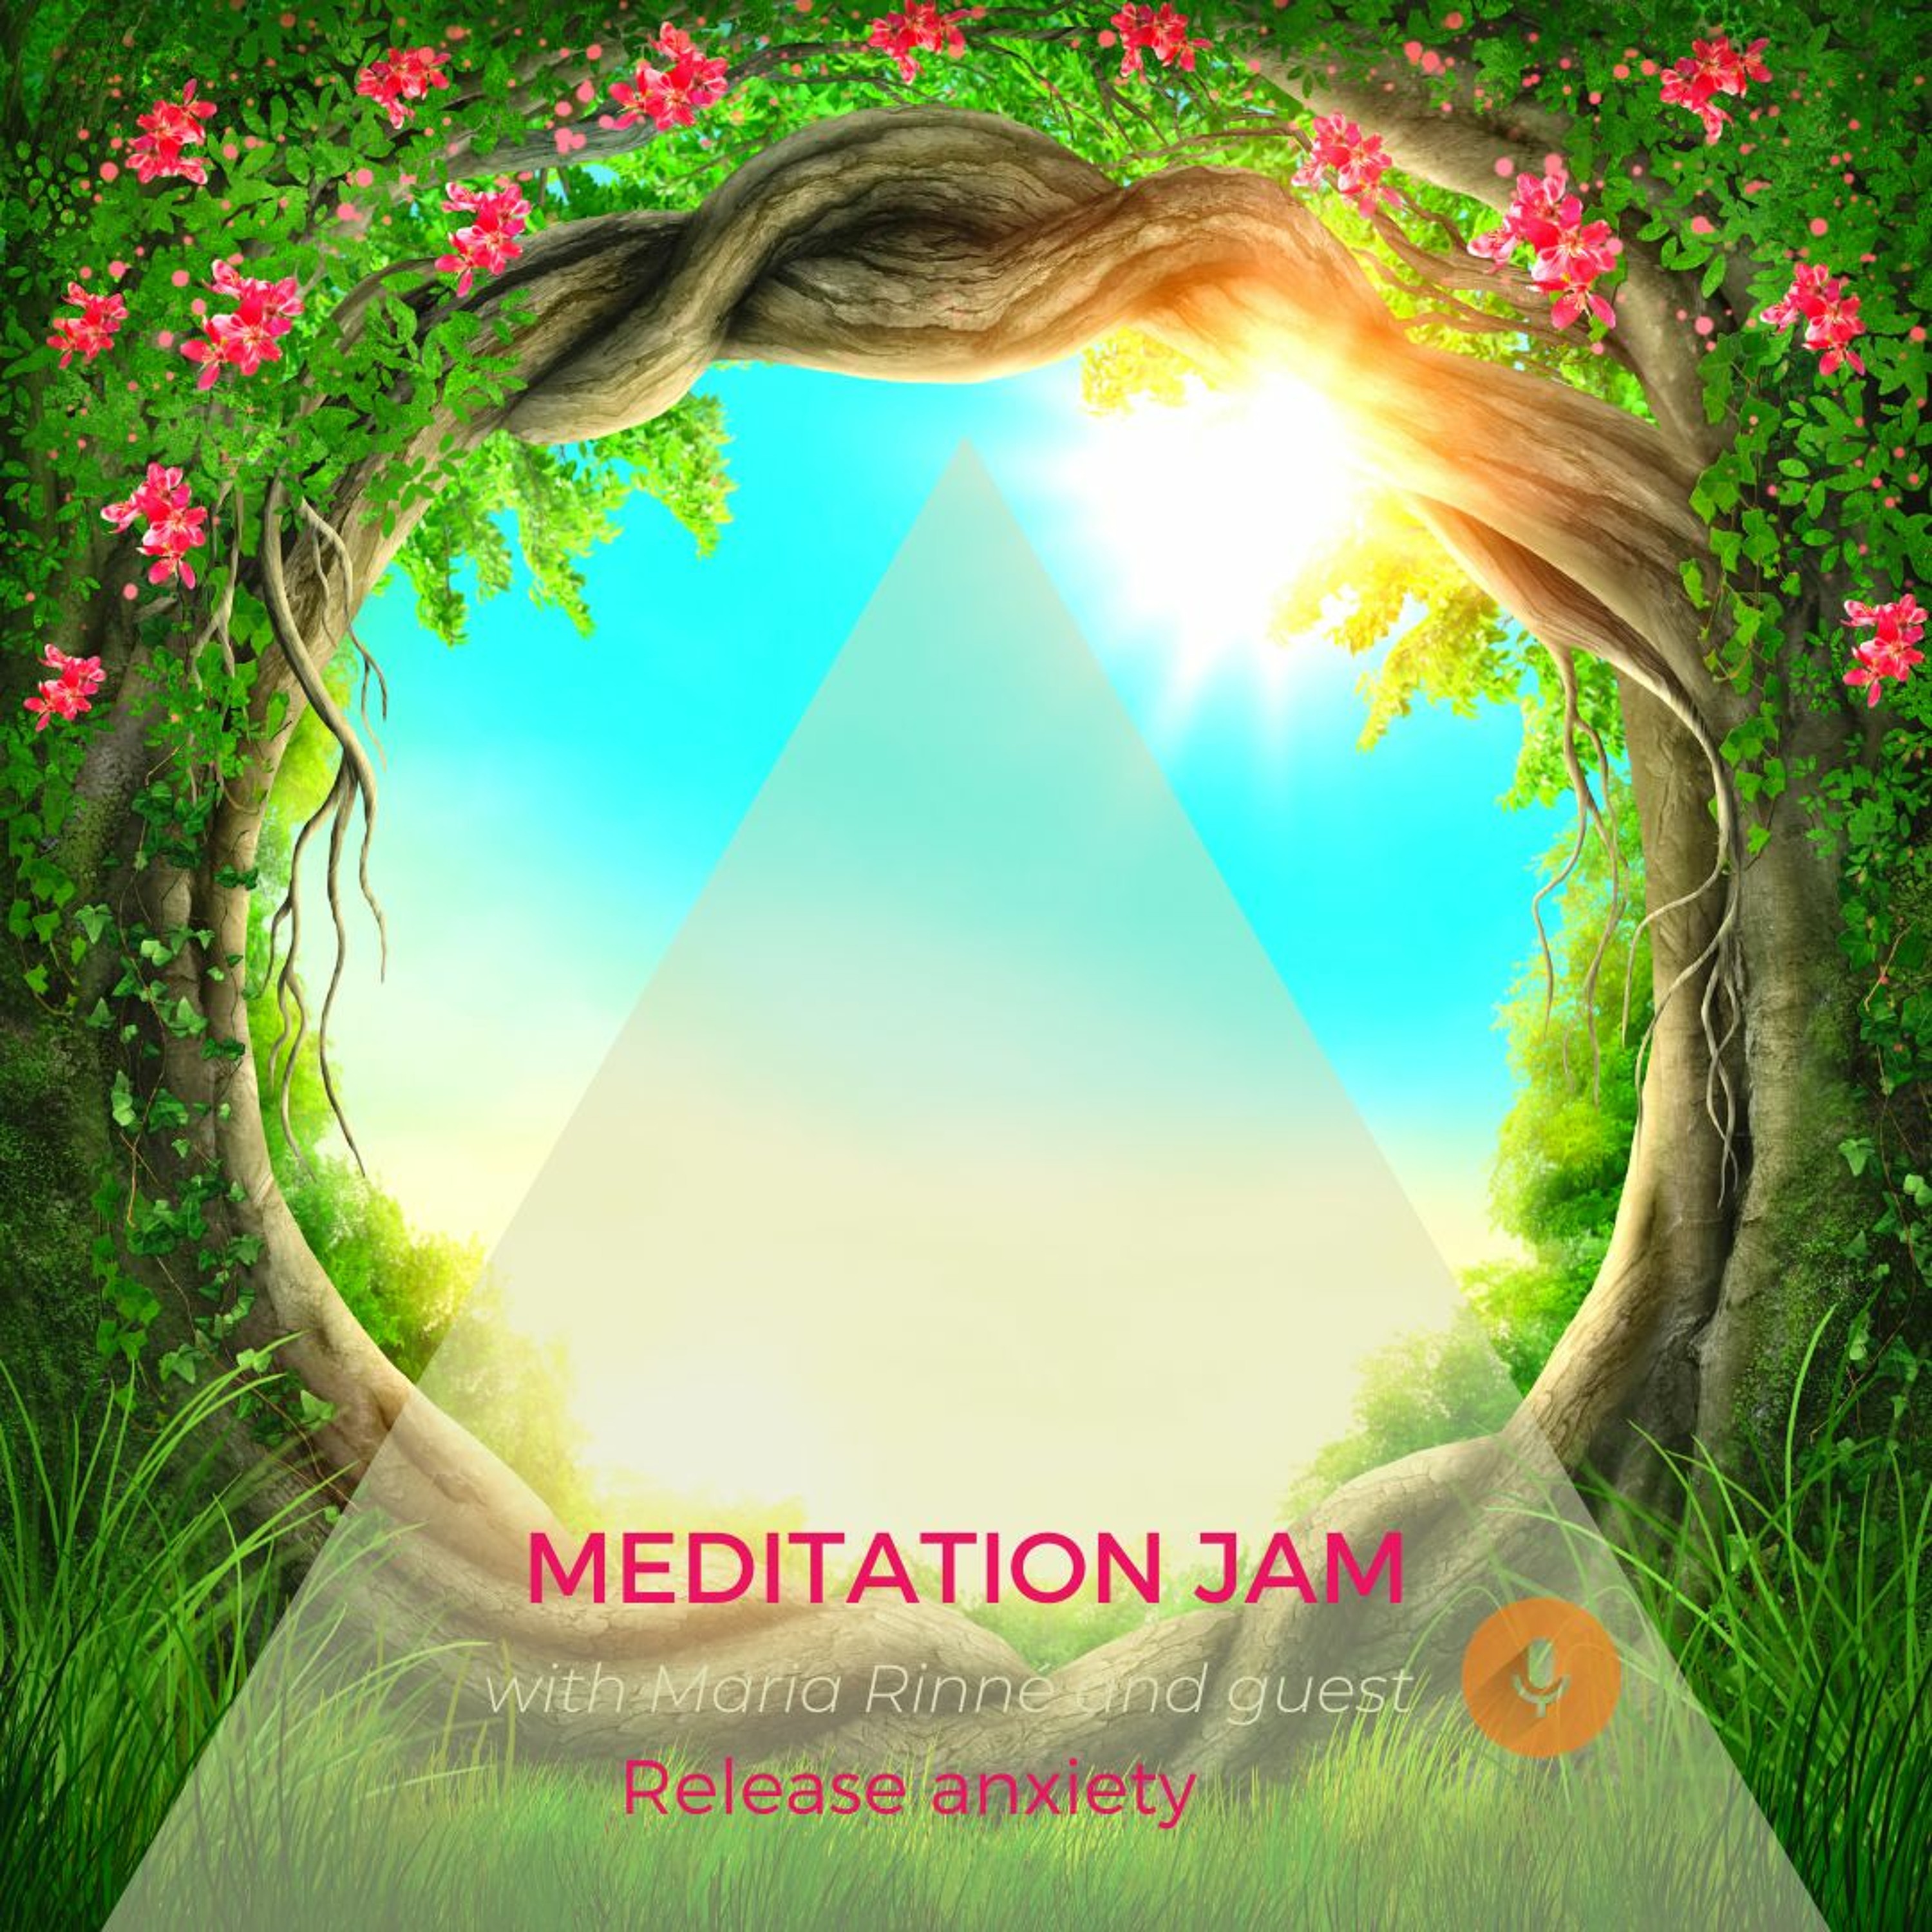 MEDITATION JAM - Release Anxiety with guest Cilla Lye - 30 August 2020